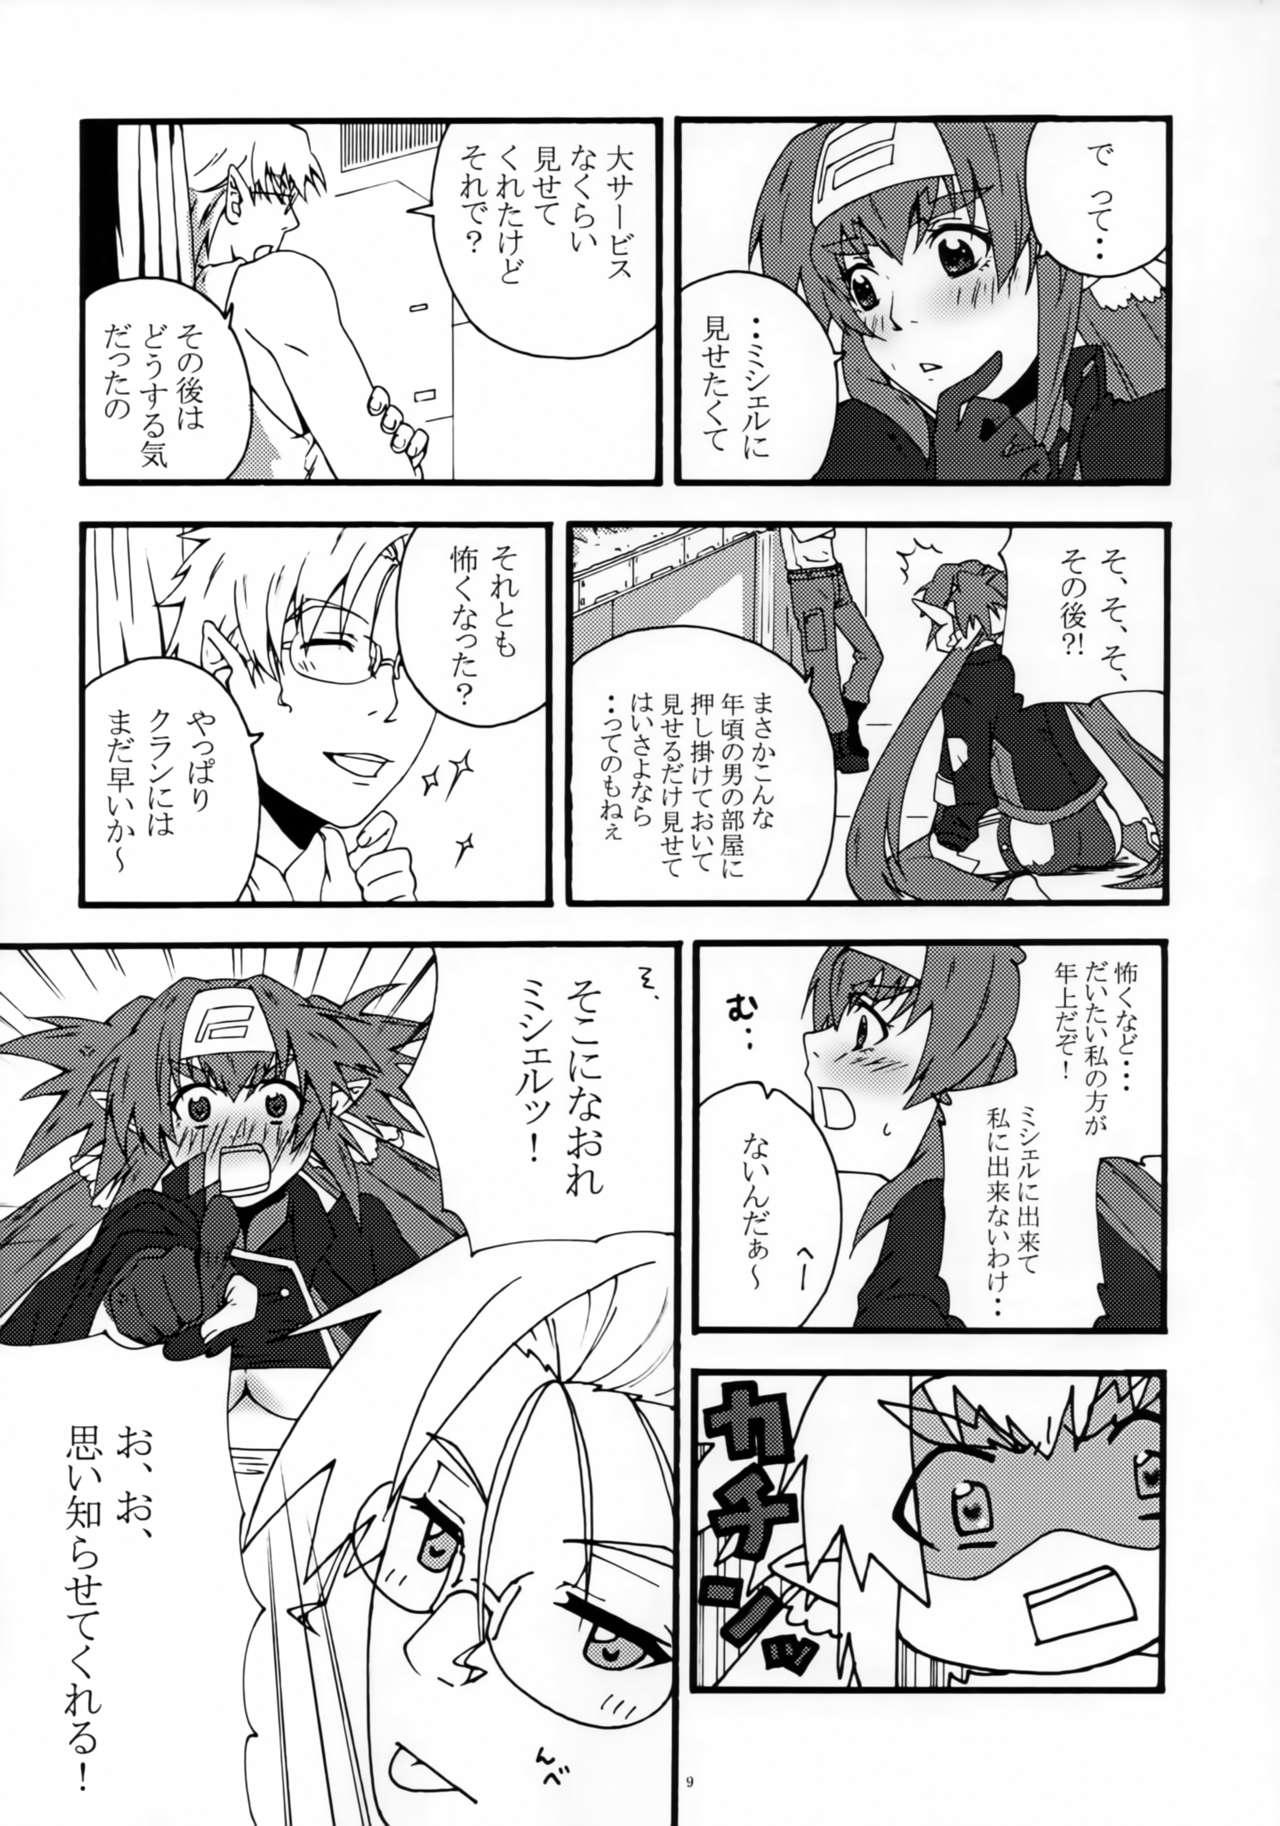 Bigass mk2 - Macross frontier 4some - Page 8